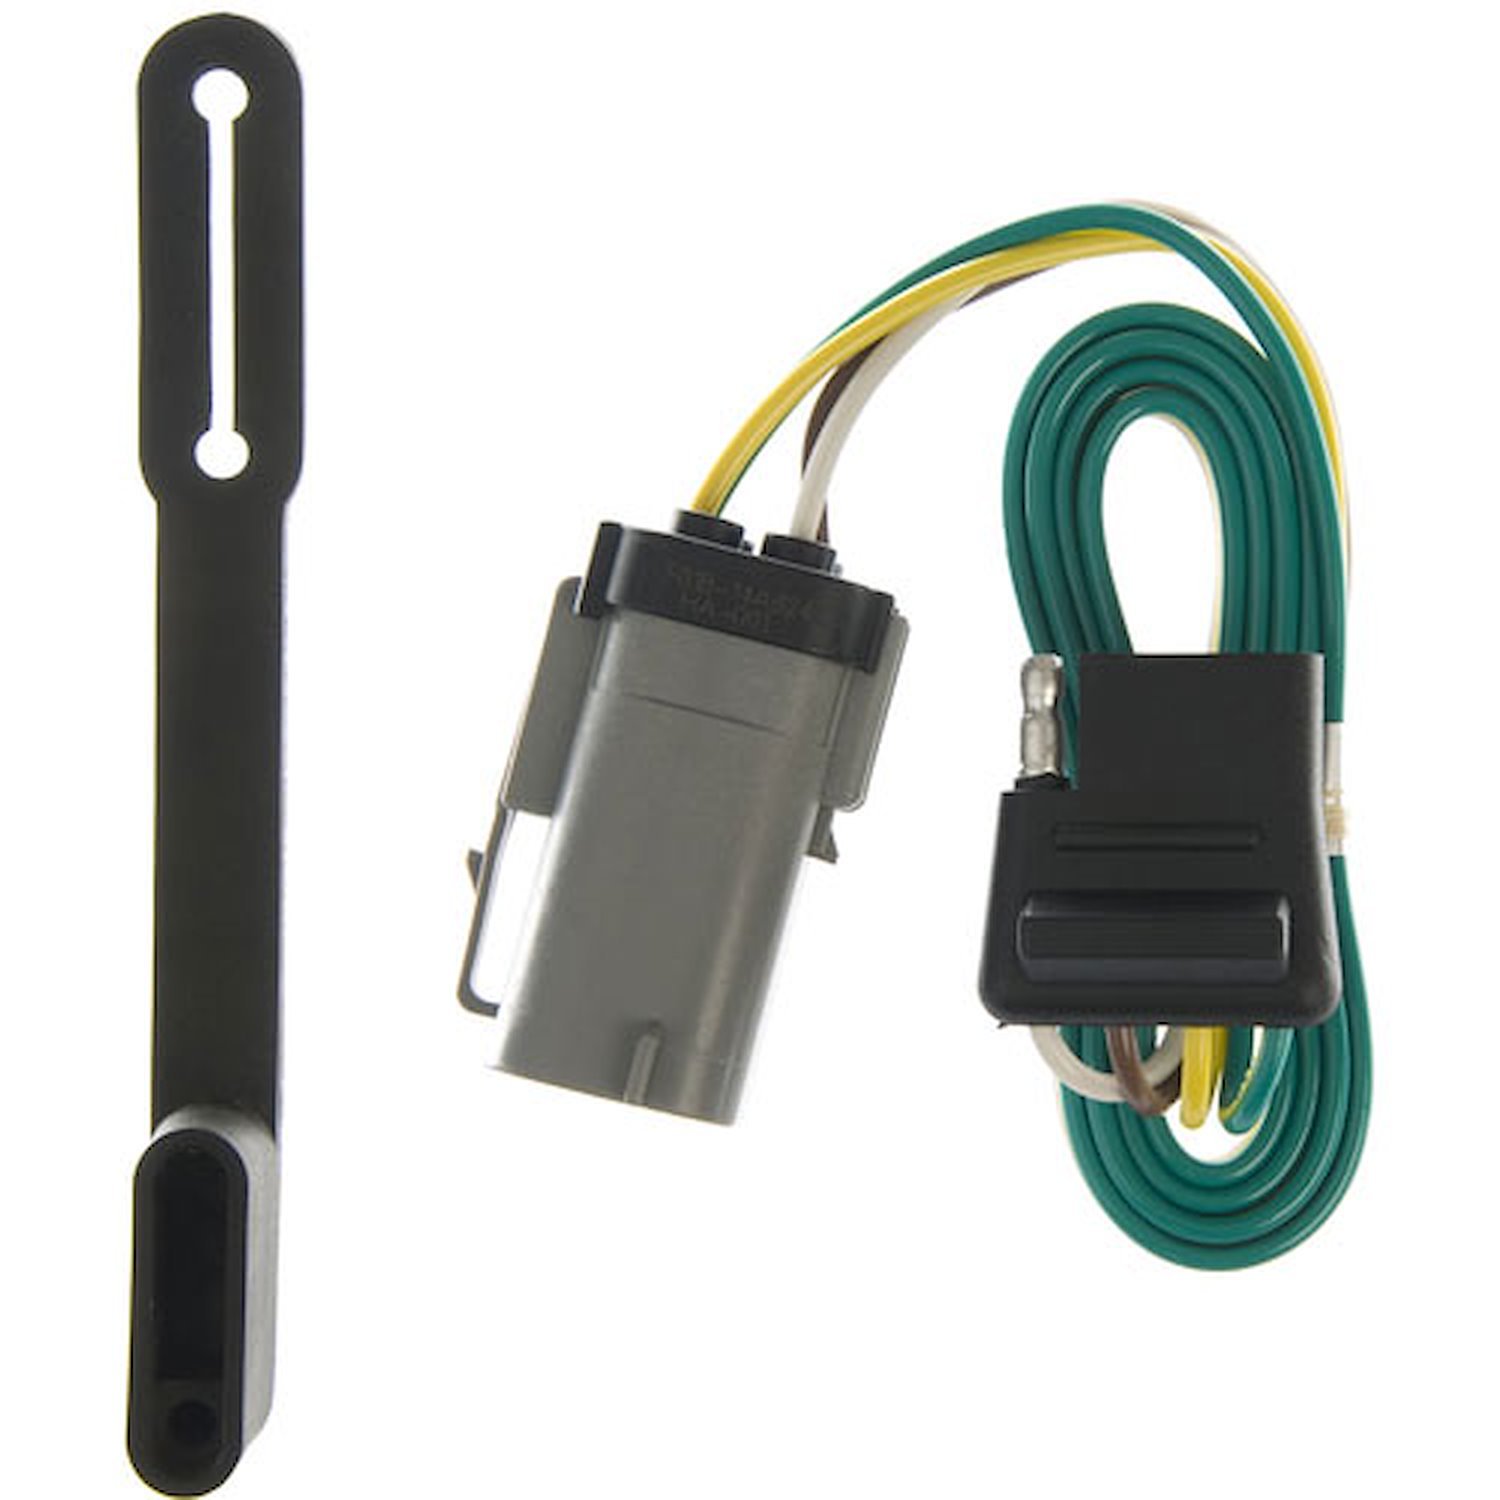 T-Connector / 2 Wire Electrical System 1999-2001 Ford F-250/F-350/F-450/F-550 Super Duty Pickup